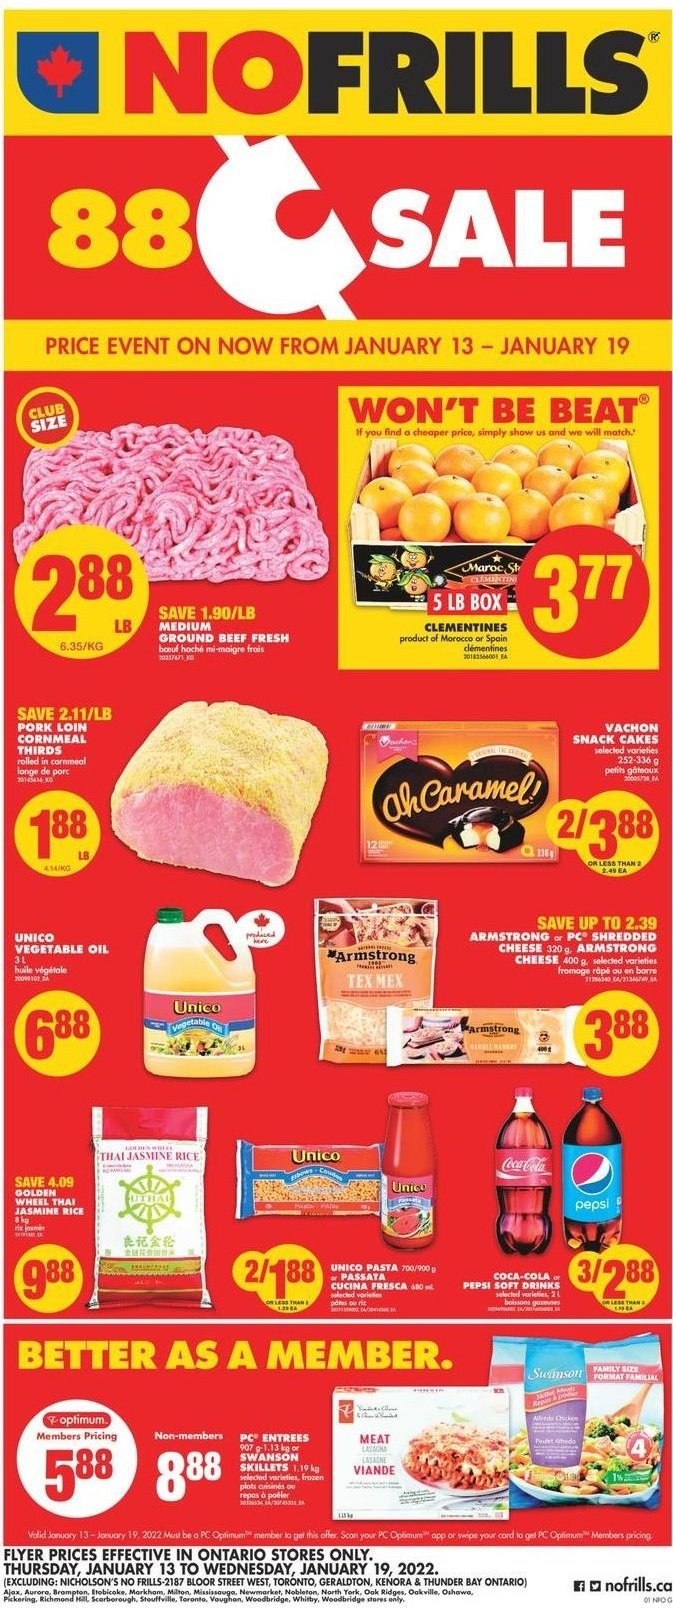 thumbnail - No Frills Flyer - January 13, 2022 - January 19, 2022 - Sales products - cake, clementines, pasta, lasagna meal, shredded cheese, snack, rice, jasmine rice, vegetable oil, oil, Coca-Cola, Pepsi, soft drink, beef meat, ground beef, pork loin, pork meat, Ajax. Page 1.